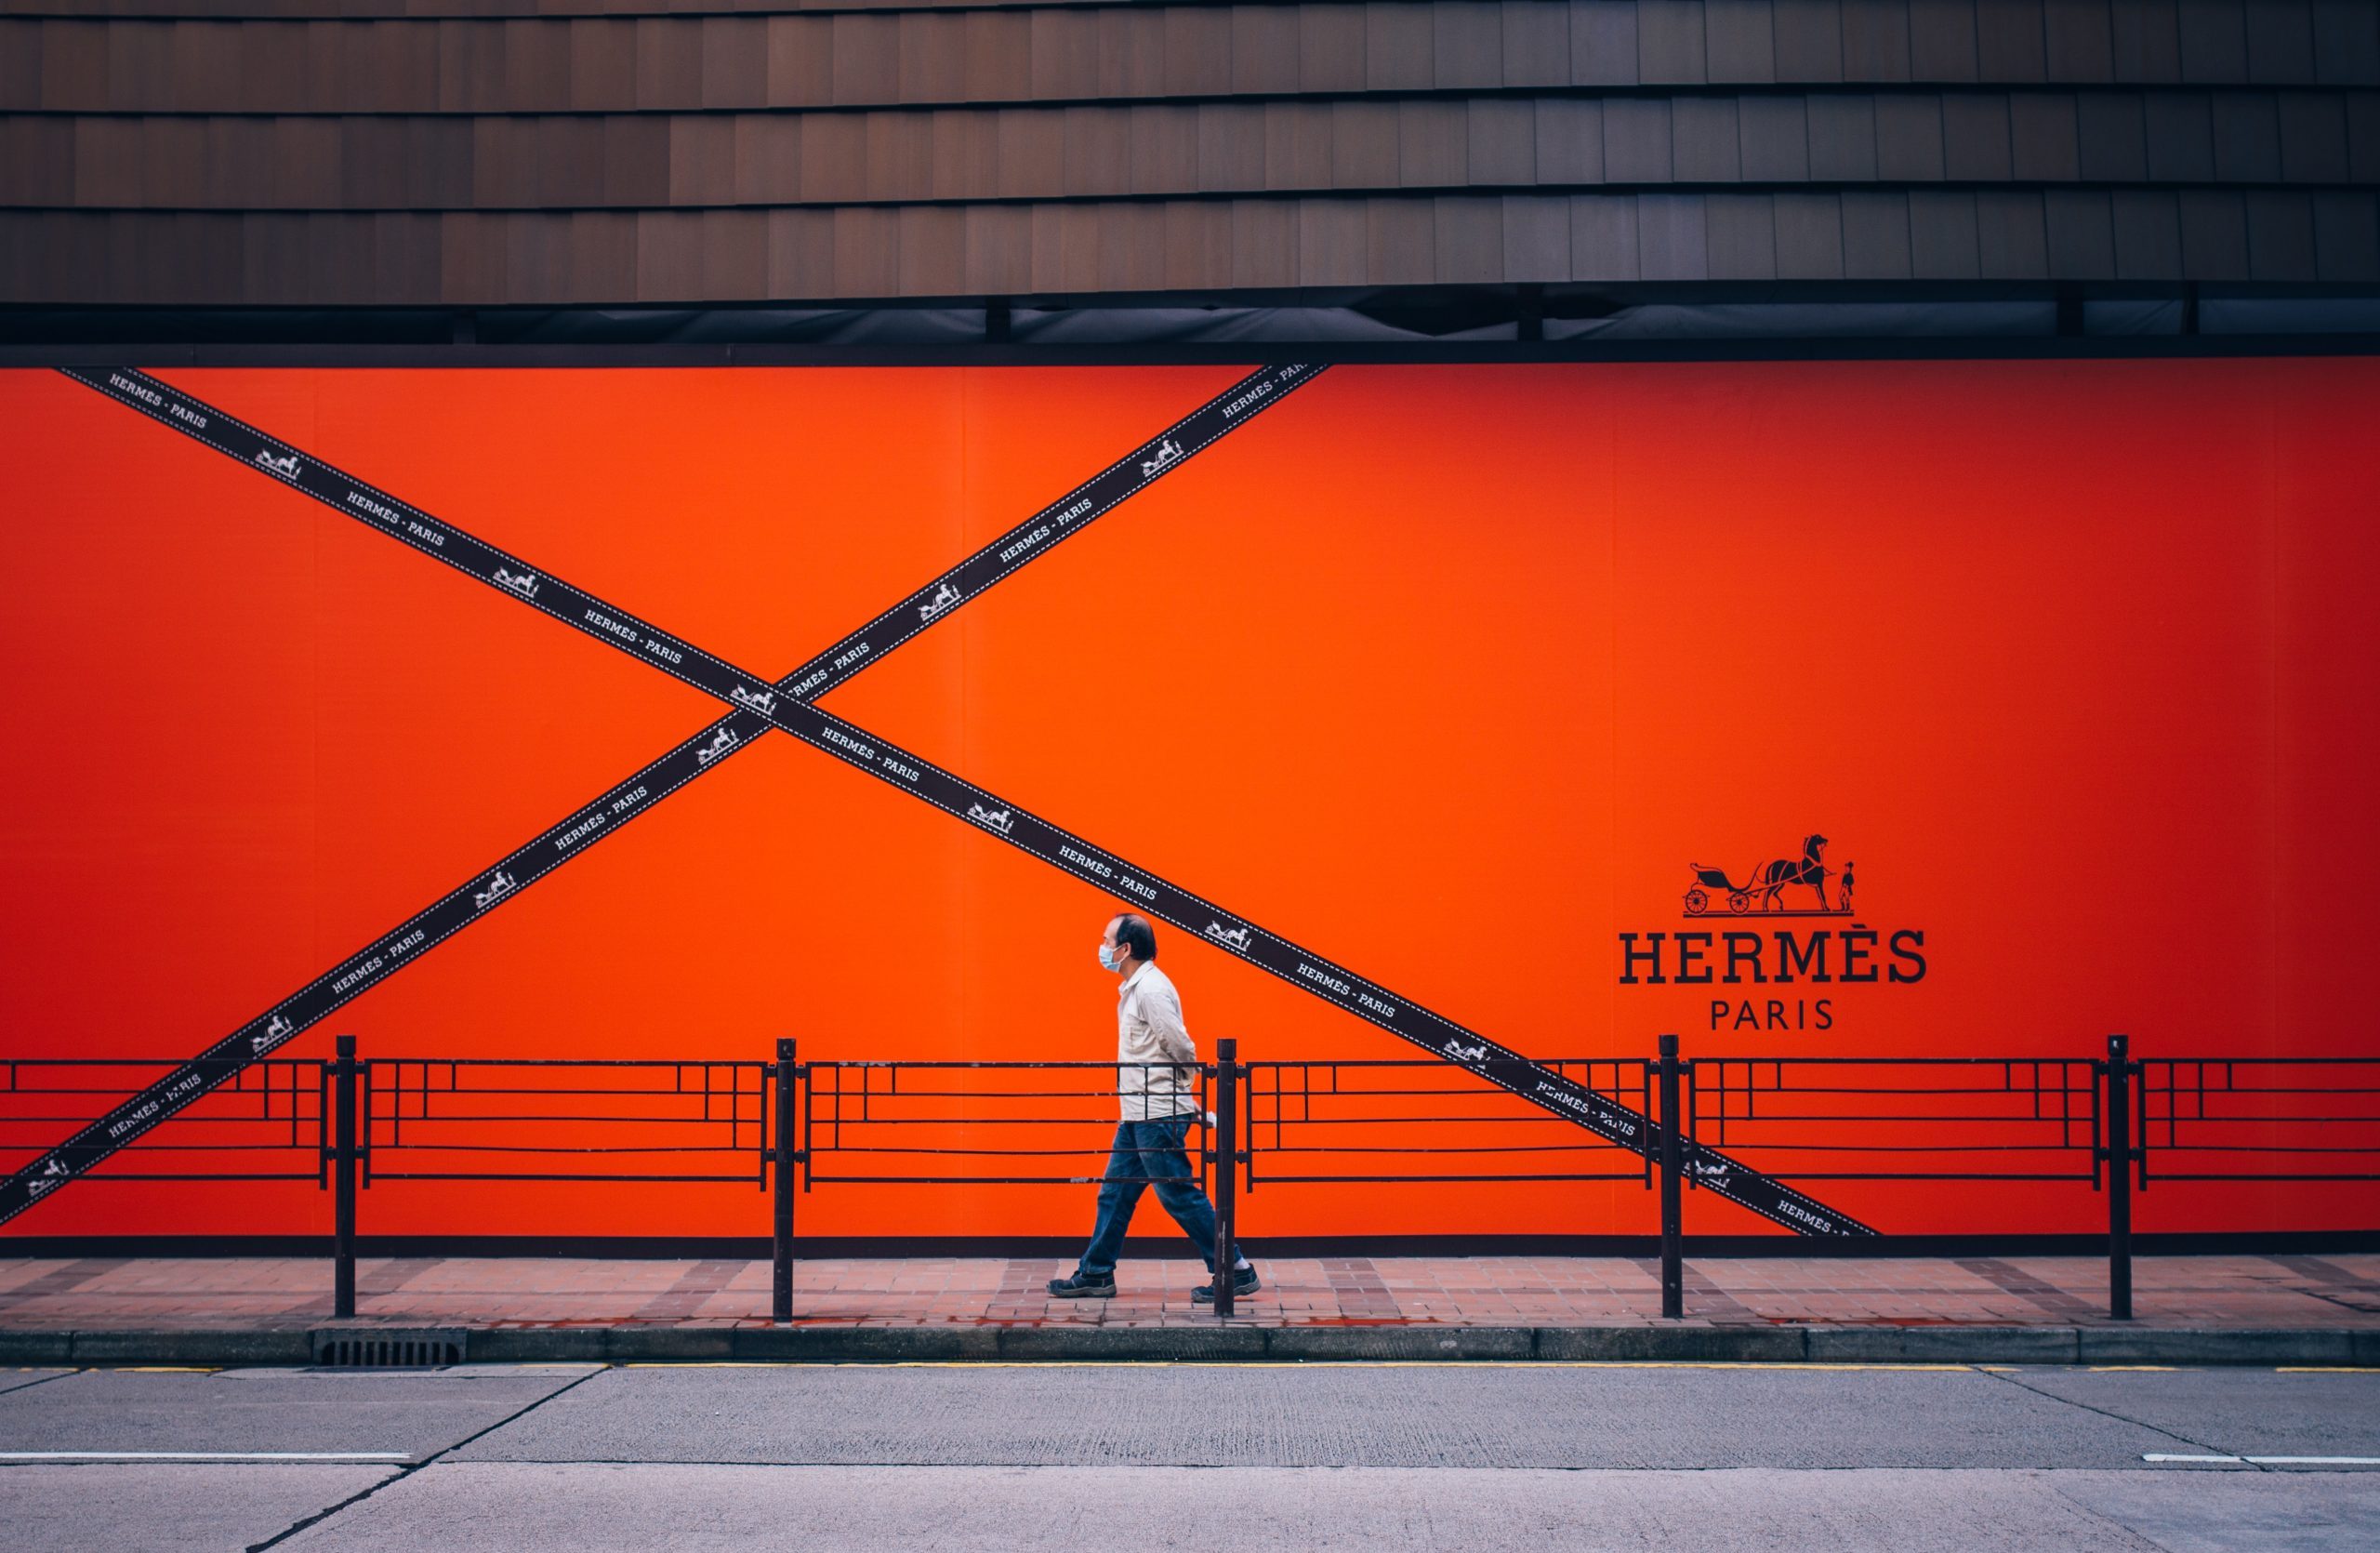 Notorious Hermes waiting list a thing of the past?